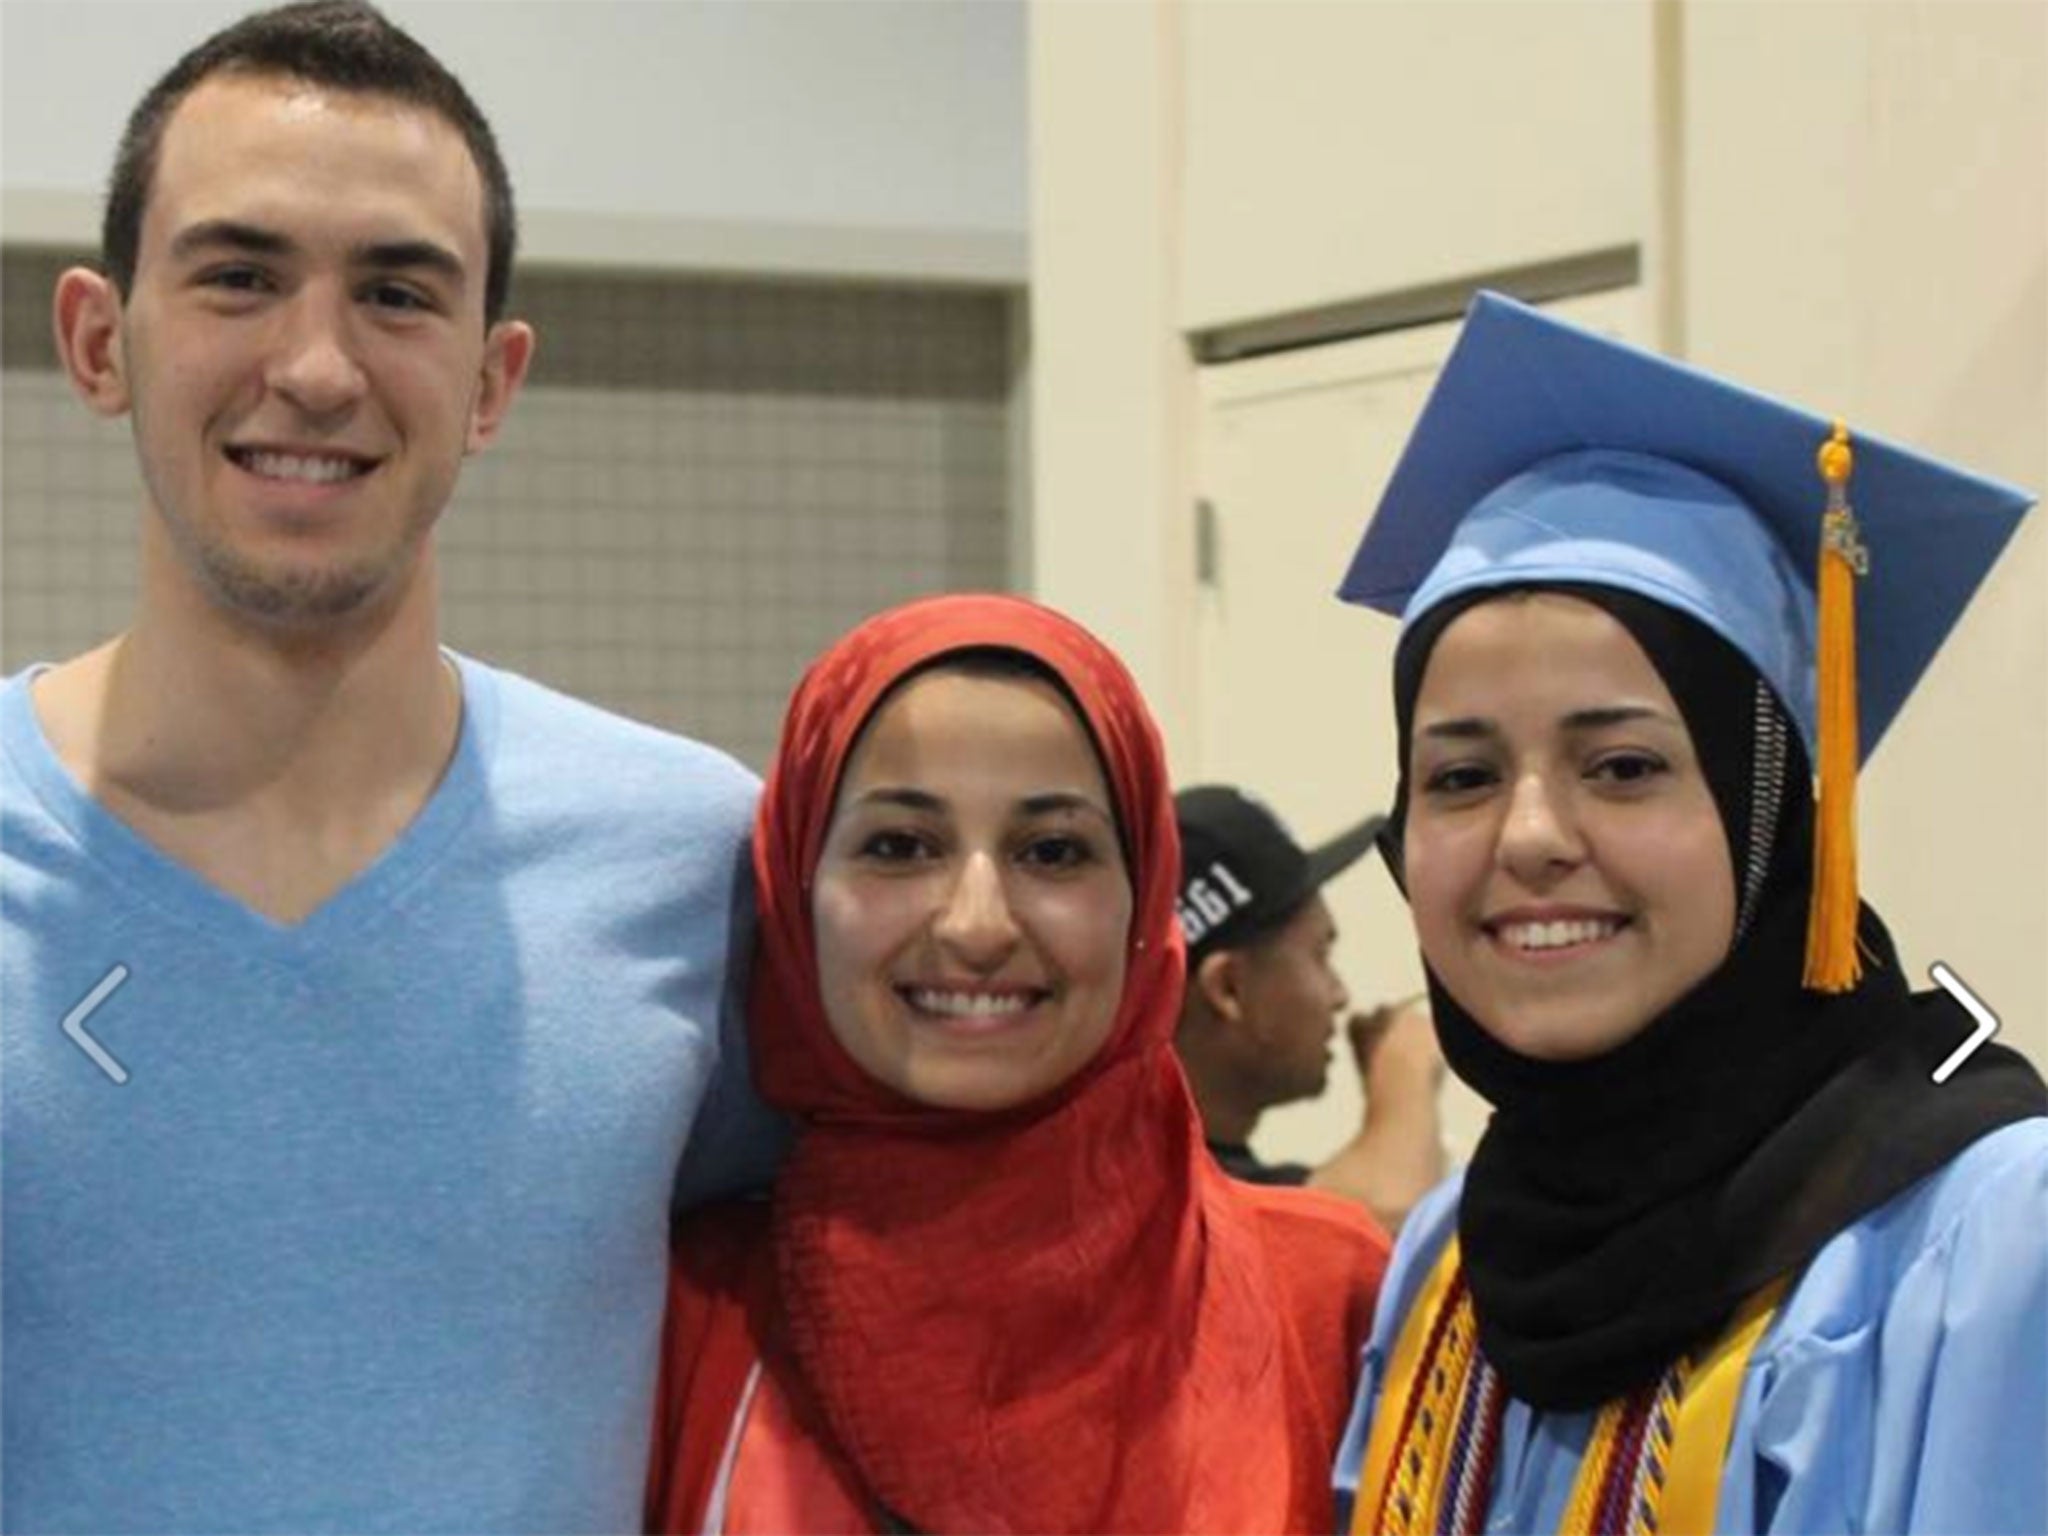 The victims of the shooting, from left to right: Deah Shaddy Barakat, 23, his wife Yusor Mohammad, 21, and her sister, Razan Mohammad Abu-Salha, 19